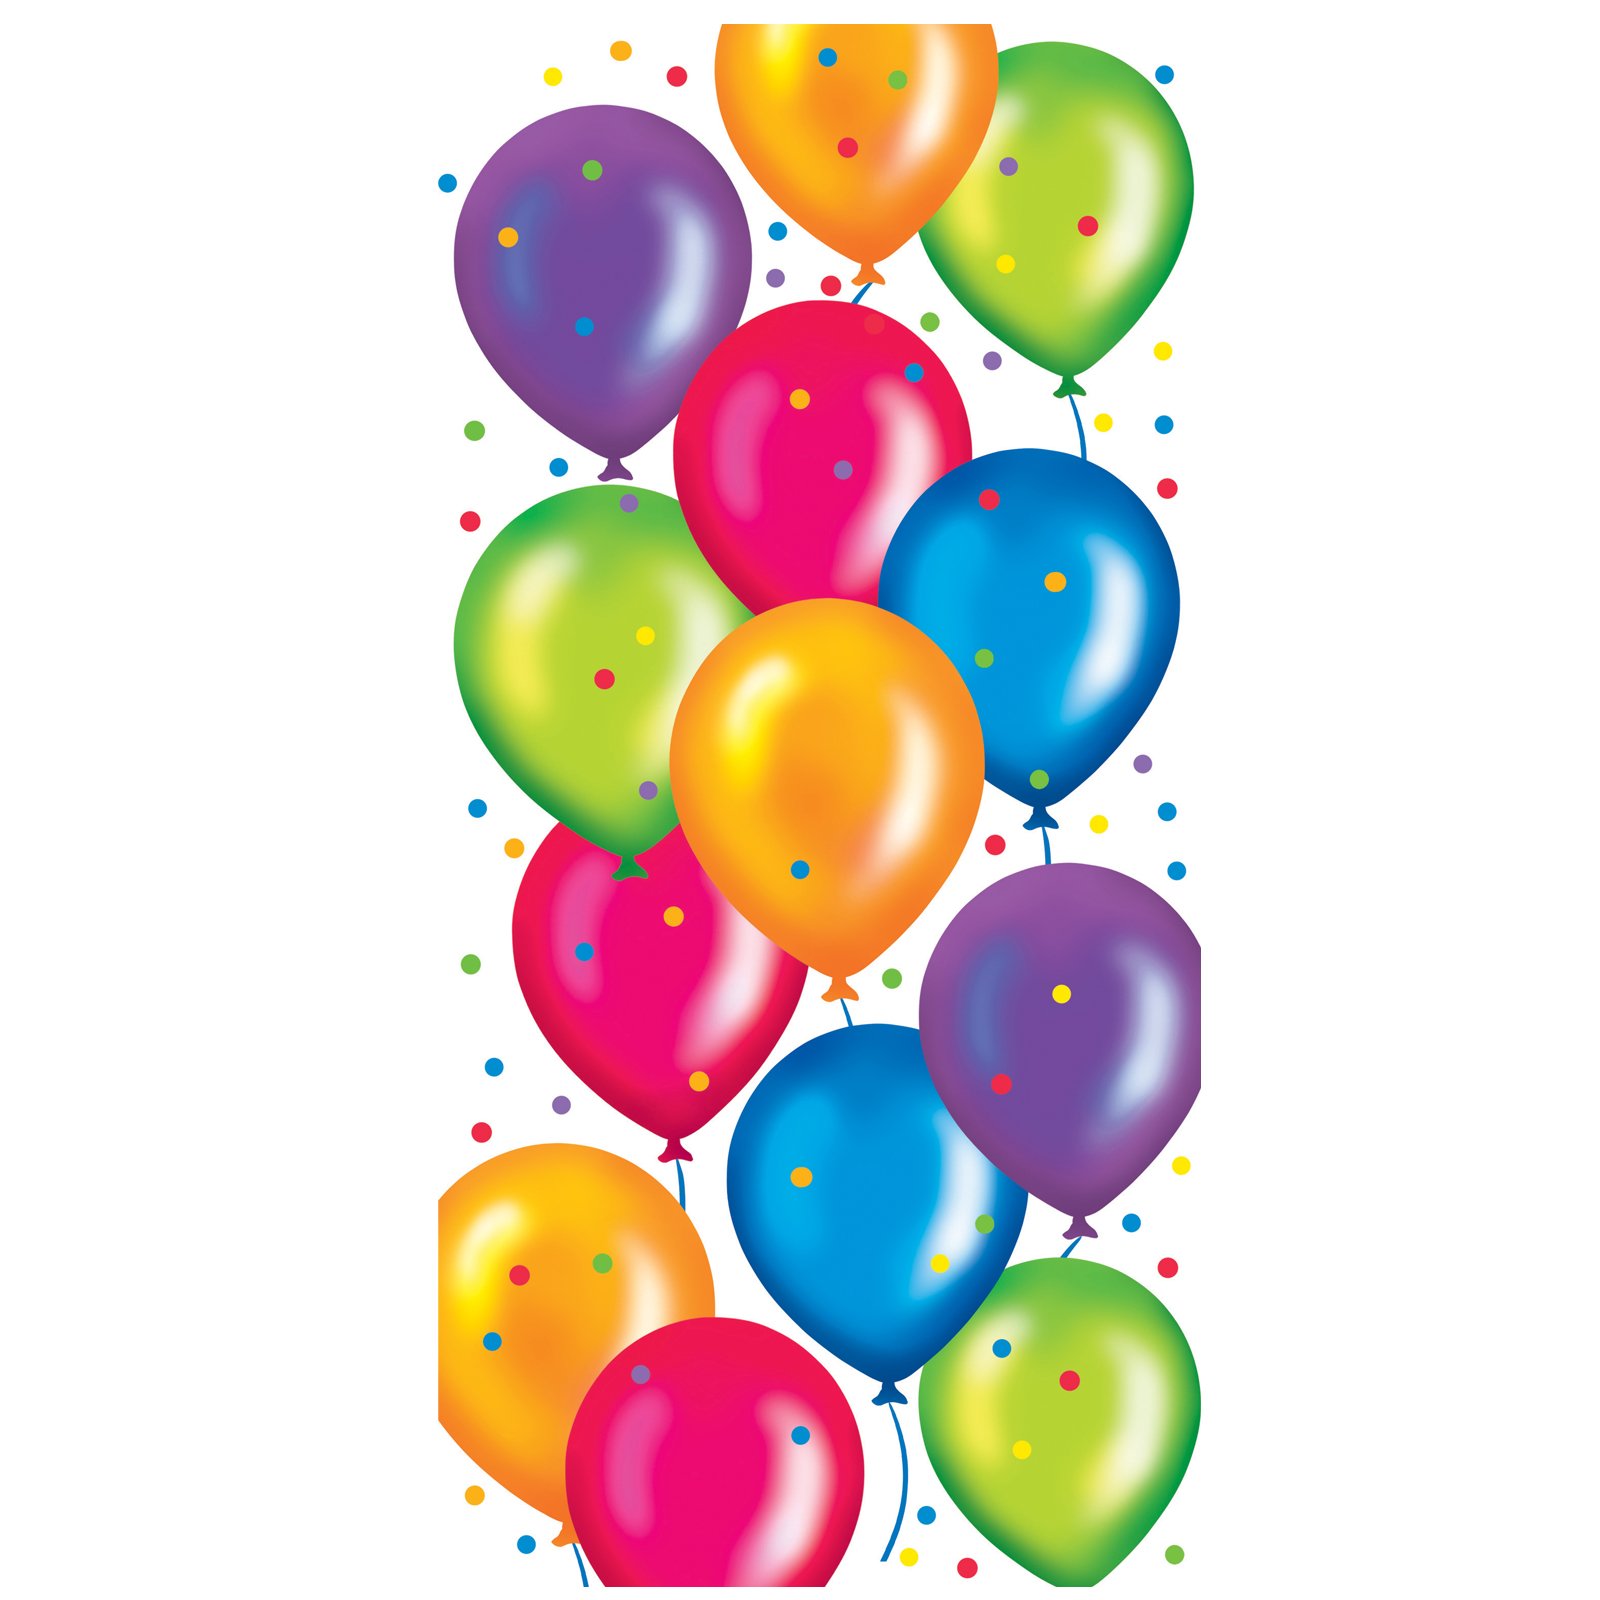 Happy Birthday Balloons Clipart   Clipart Panda   Free Clipart Images